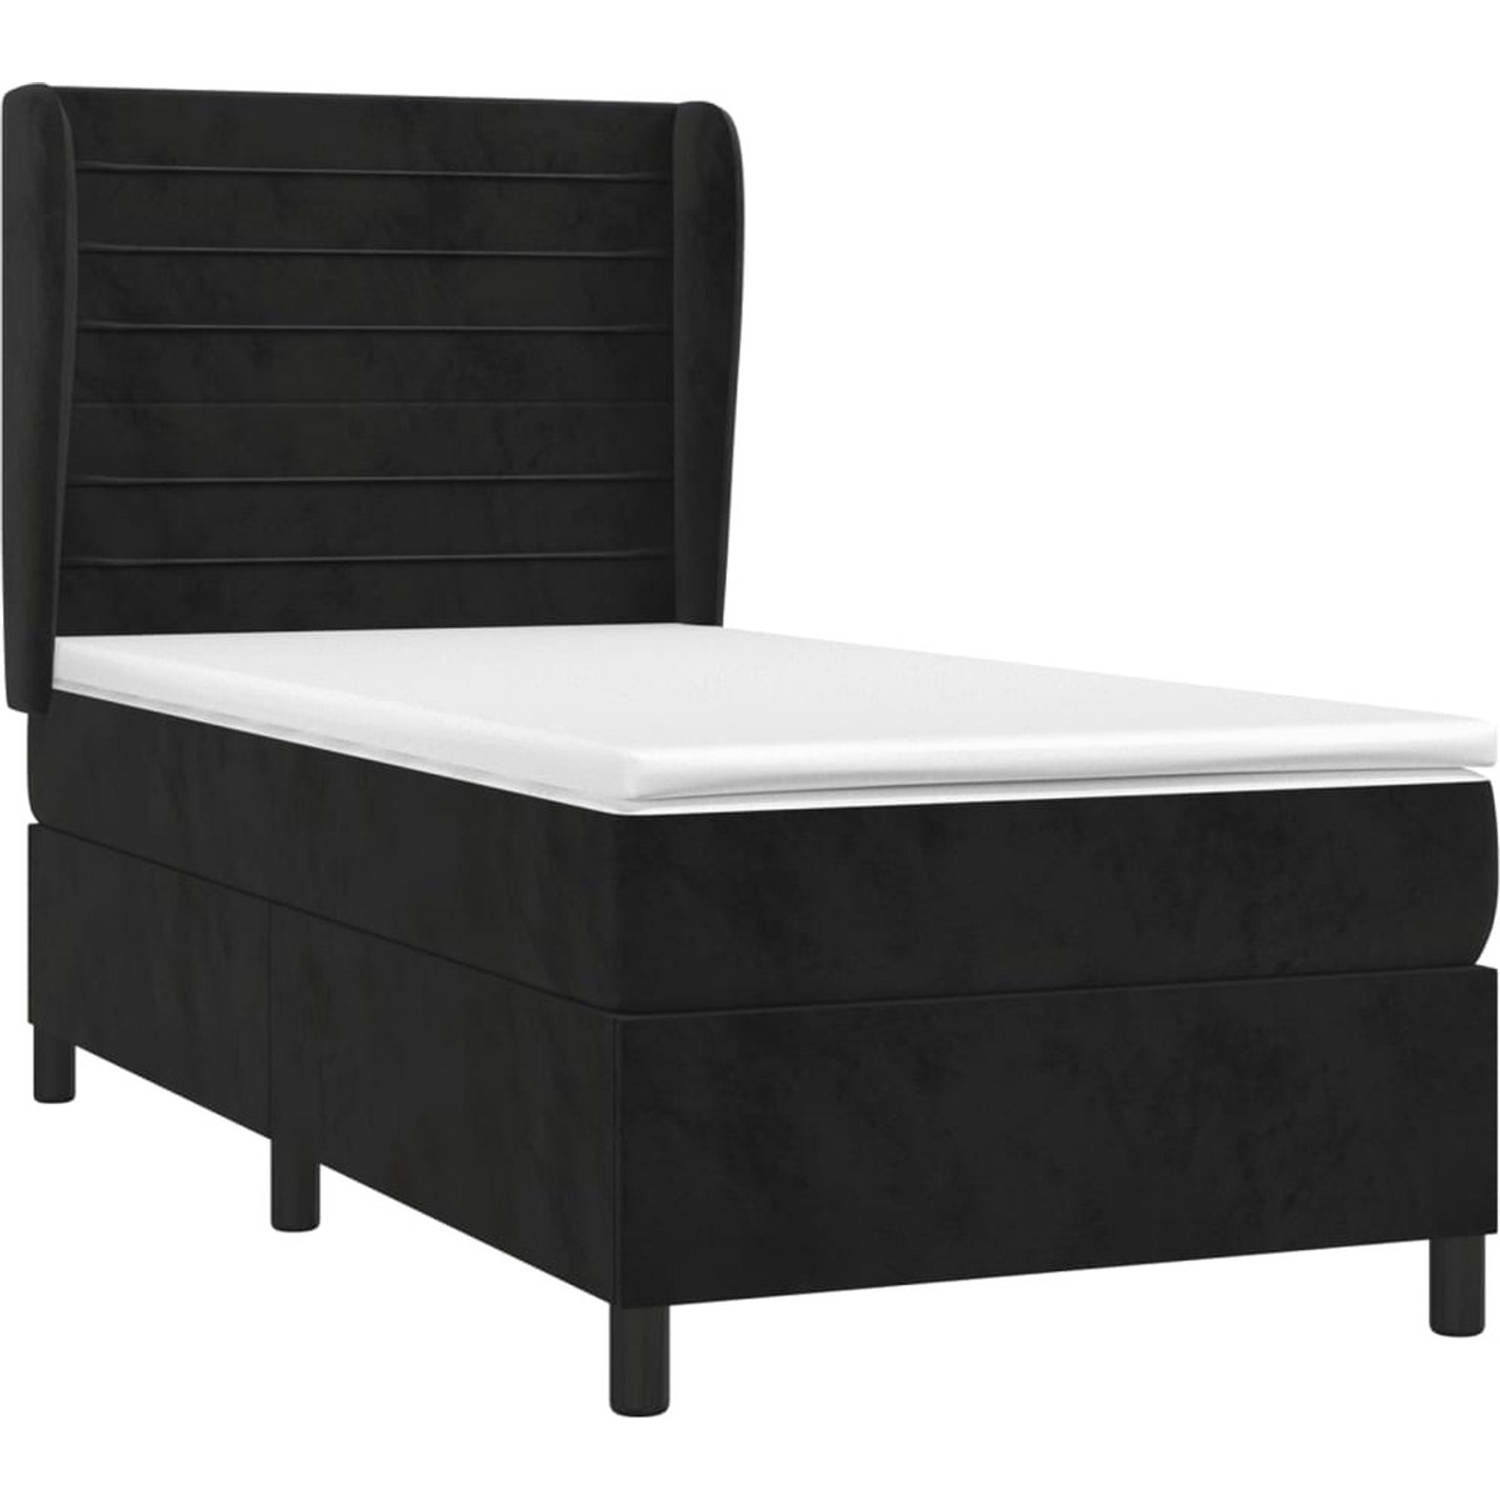 The Living Store Boxspringbed - Bed - 193 x 93 x 118/128 cm - Zacht fluweel